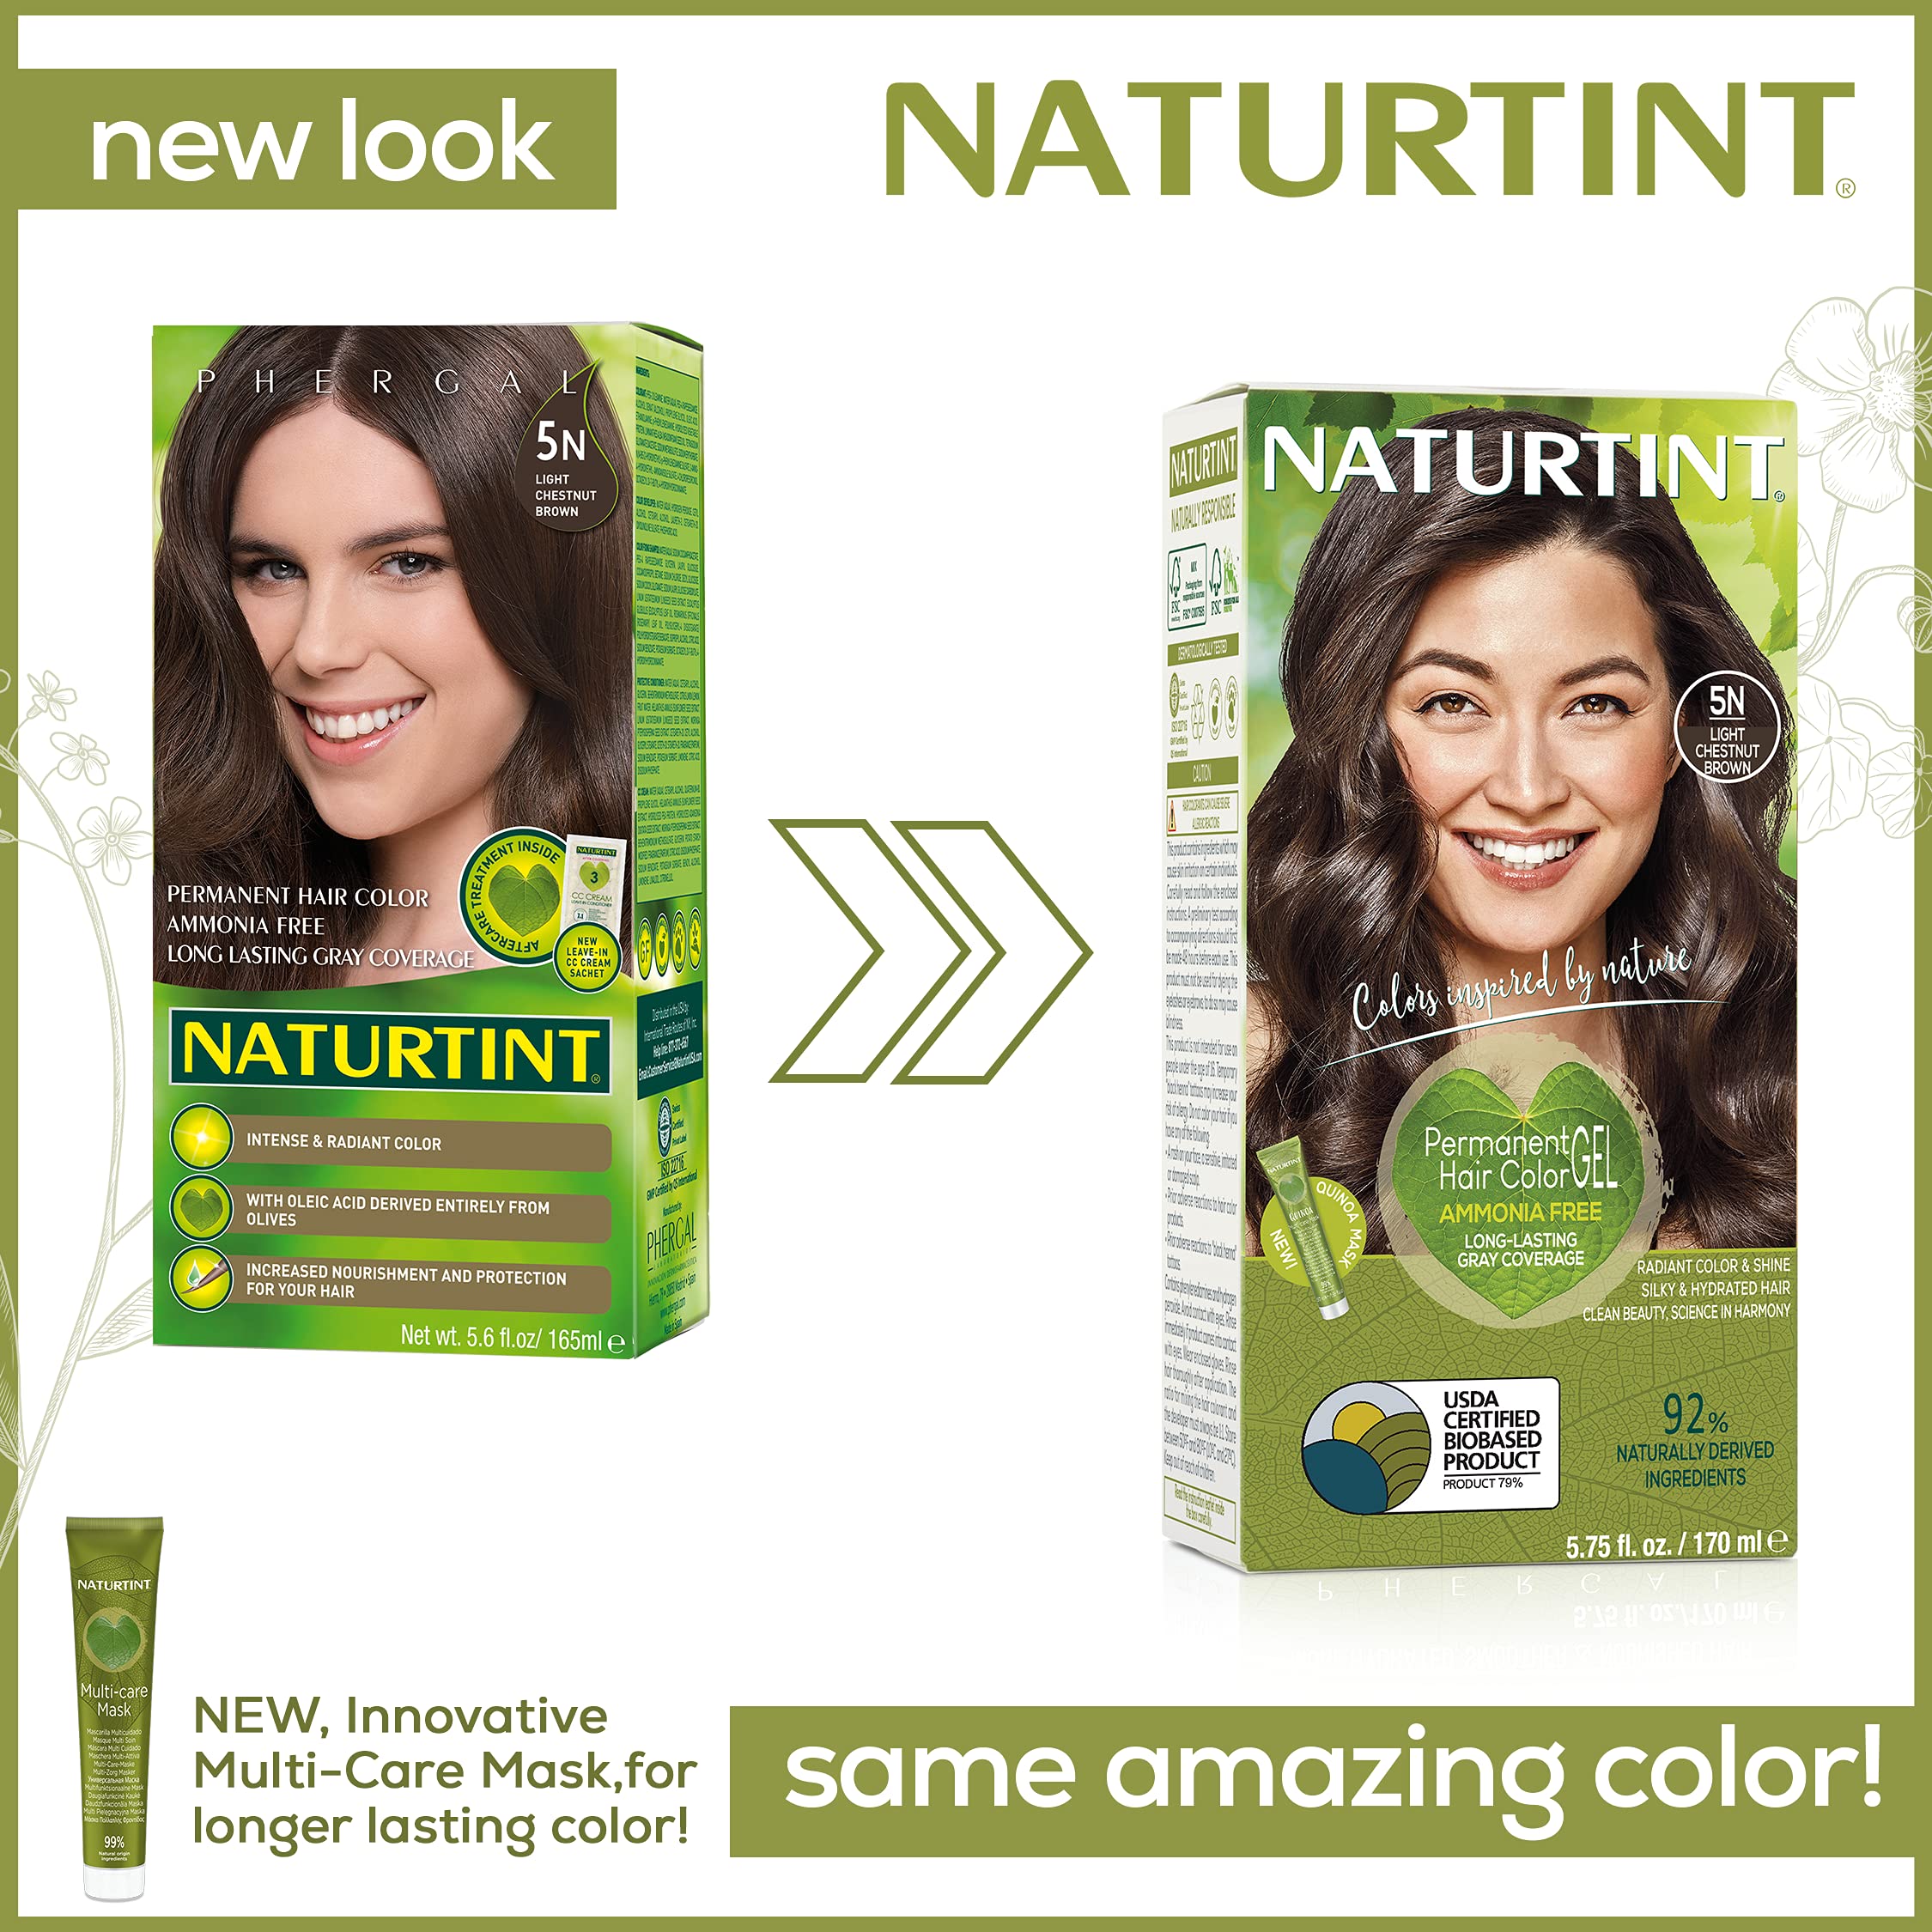 Naturtint Permanent Hair Color 5N Light Chestnut Brown (Pack of 6), Ammonia Free, Vegan, Cruelty Free, up to 100% Gray Coverage, Long Lasting Results